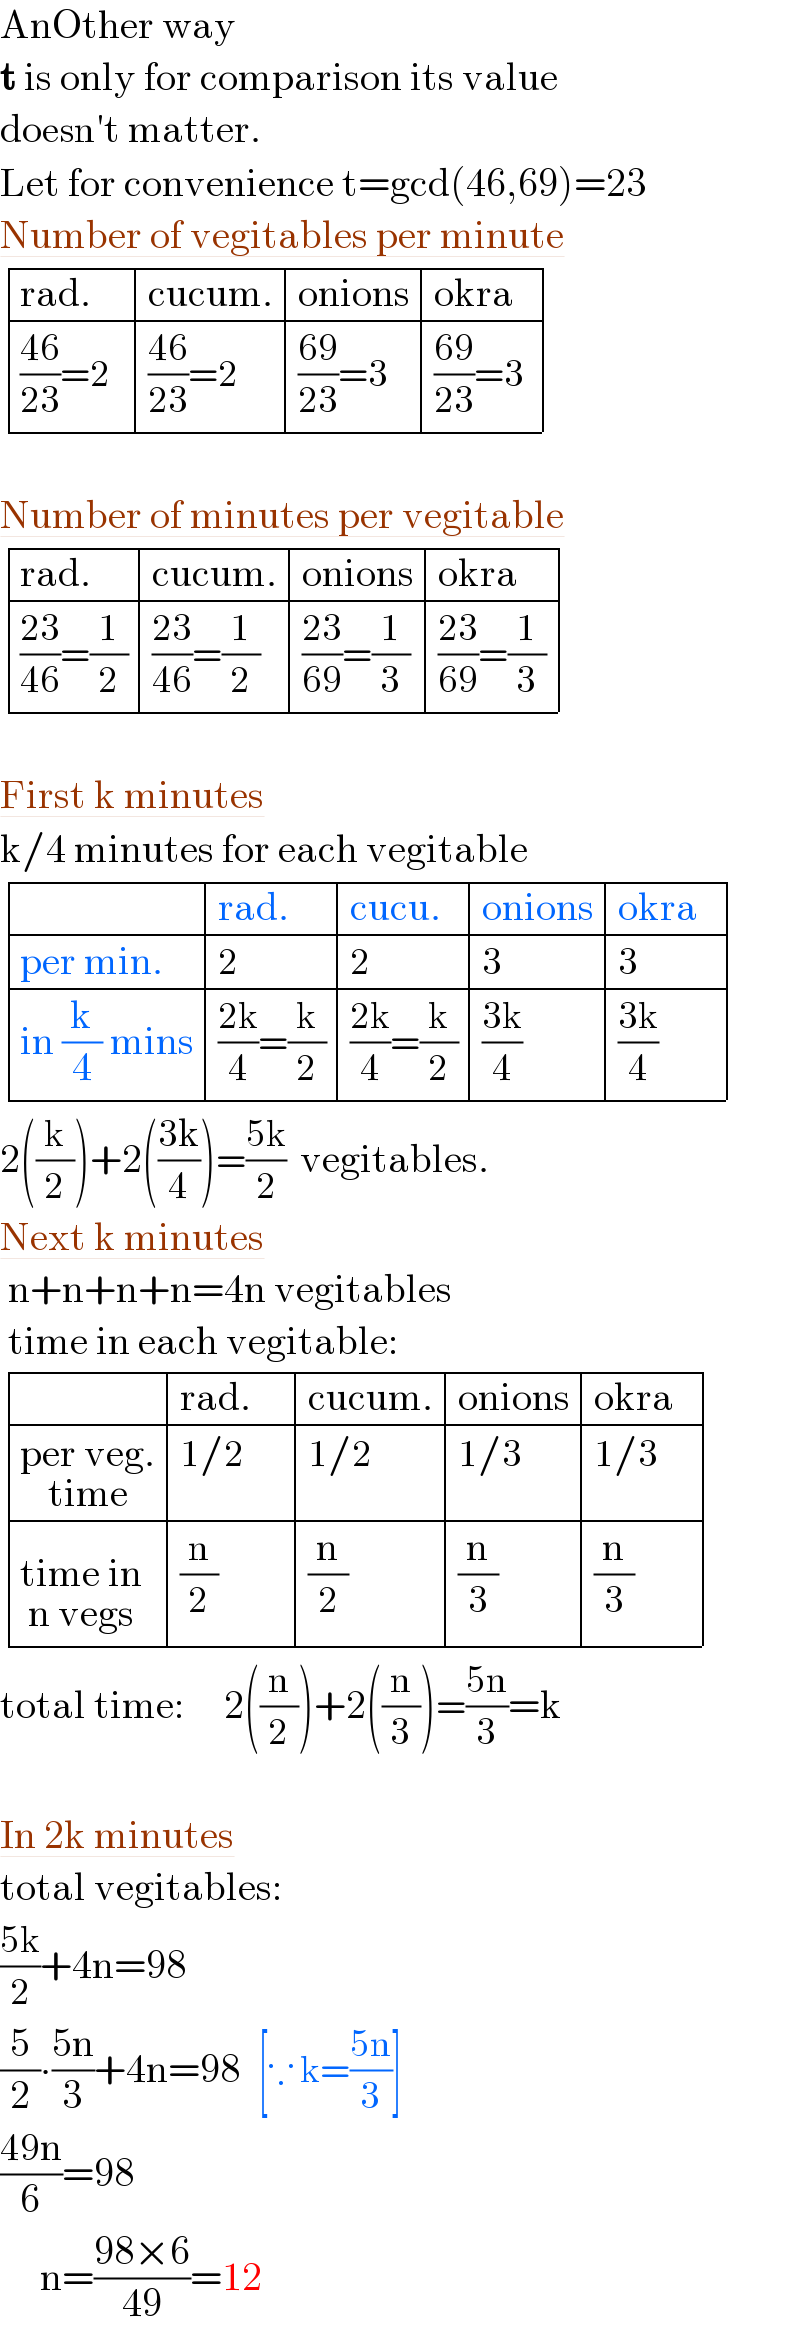 AnOther way  t is only for comparison its value   doesn′t matter.  Let for convenience t=gcd(46,69)=23  Number of vegitables per minute   determinant (((rad.    ),(cucum.),(onions),(okra  )),((((46)/(23))=2),(((46)/(23))=2),(((69)/(23))=3),(((69)/(23))=3)))     Number of minutes per vegitable   determinant (((rad.    ),(cucum.),(onions),(okra  )),((((23)/(46))=(1/2)),(((23)/(46))=(1/2)),(((23)/(69))=(1/3)),(((23)/(69))=(1/3))))     First k minutes  k/4 minutes for each vegitable   determinant ((,(rad.    ),(cucu.),(onions),(okra  )),((per min.),2,2,3,3),((in (k/4) mins),(((2k)/4)=(k/2)),(((2k)/4)=(k/2)),((3k)/4),((3k)/4)))   2((k/2))+2(((3k)/4))=((5k)/2)  vegitables.  Next k minutes   n+n+n+n=4n vegitables   time in each vegitable:   determinant ((,(rad.    ),(cucum.),(onions),(okra  )),((per veg._(time) ),(1/2),(1/2),(1/3),(1/3)),((time in_(n vegs) ),(n/2),(n/2),(n/3),(n/3)))  total time:     2((n/2))+2((n/3))=((5n)/3)=k     In 2k minutes  total vegitables:  ((5k)/2)+4n=98  (5/2)∙((5n)/3)+4n=98   [∵ k=((5n)/3)]  ((49n)/6)=98       n=((98×6)/(49))=12  